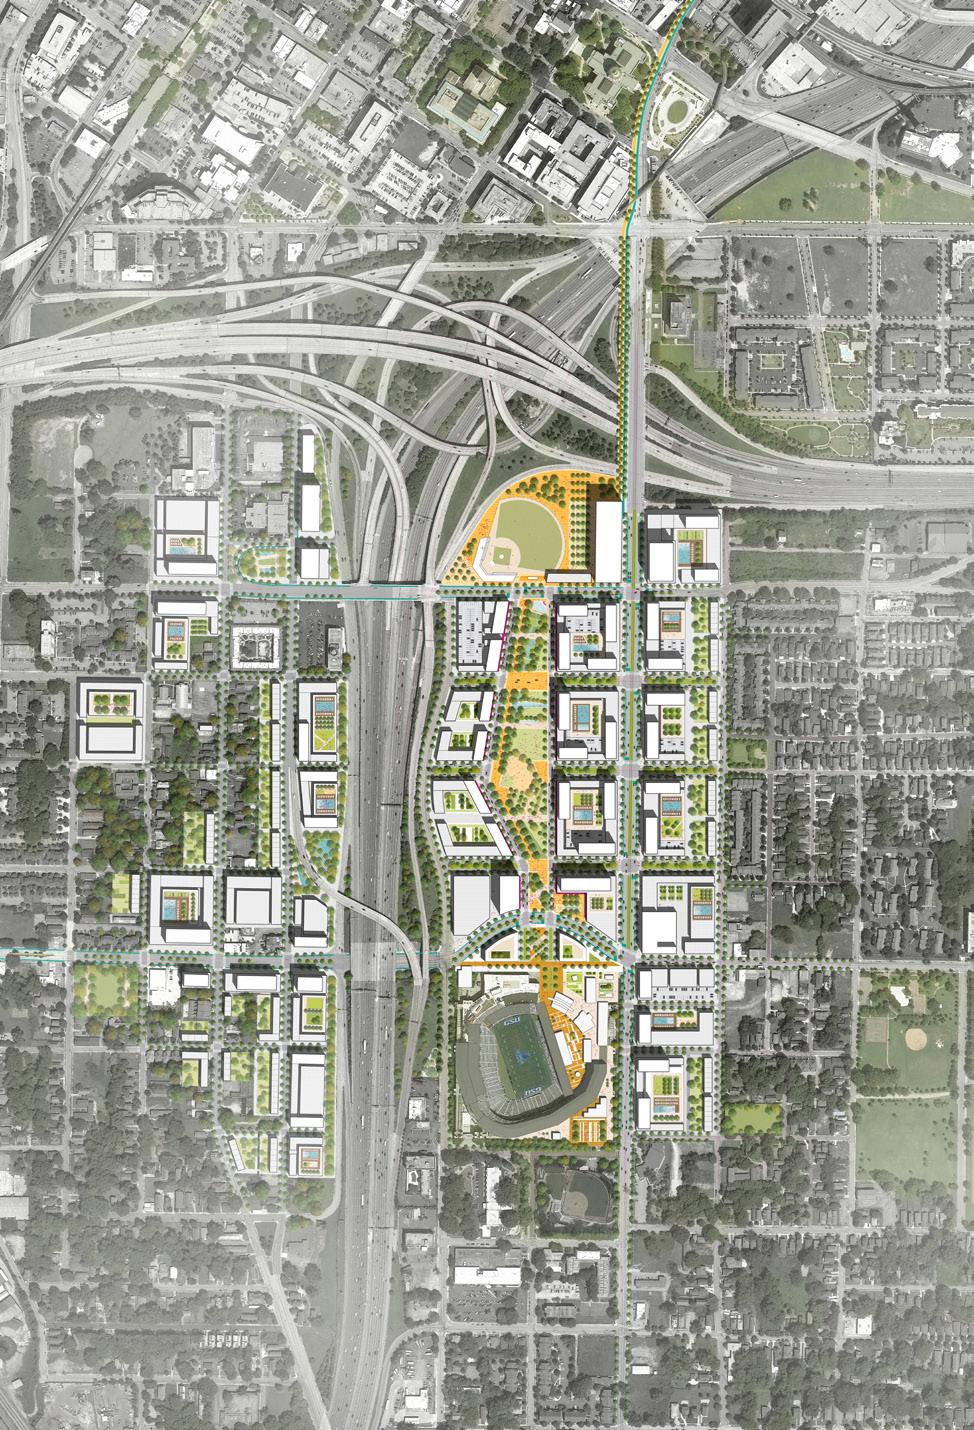 CONCEPT 0 BIG PARK capitol bridge and bike/ped corridor institutional infill baseball field district parking hank aaron park infill housing mixed use shopping street heritage park